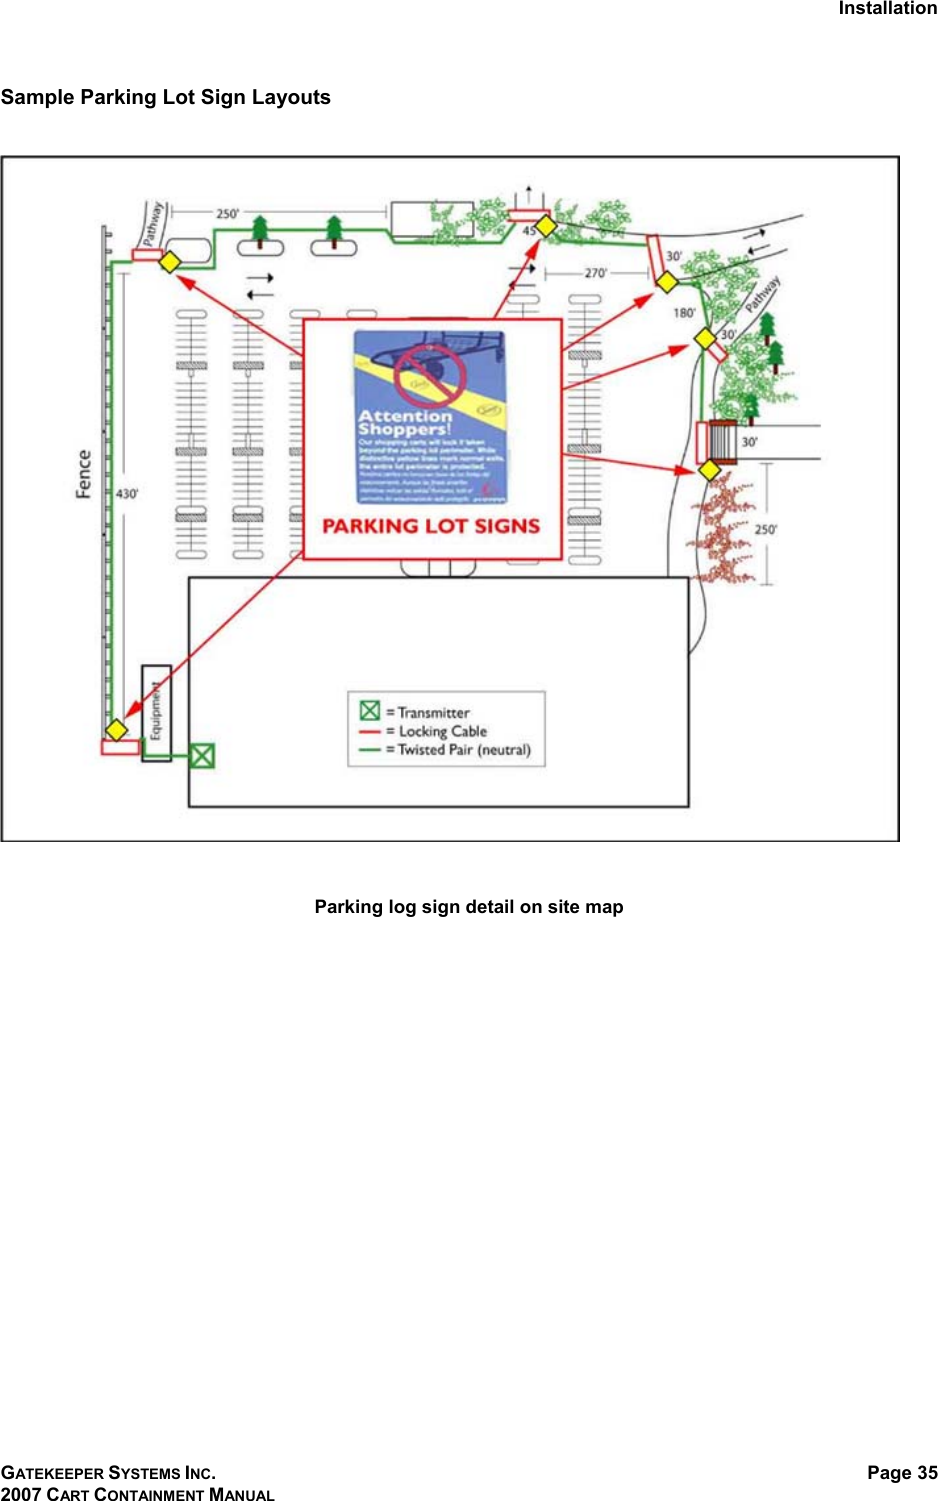 Installation GATEKEEPER SYSTEMS INC. 2007 CART CONTAINMENT MANUAL Page 35  Sample Parking Lot Sign Layouts     Parking log sign detail on site map 